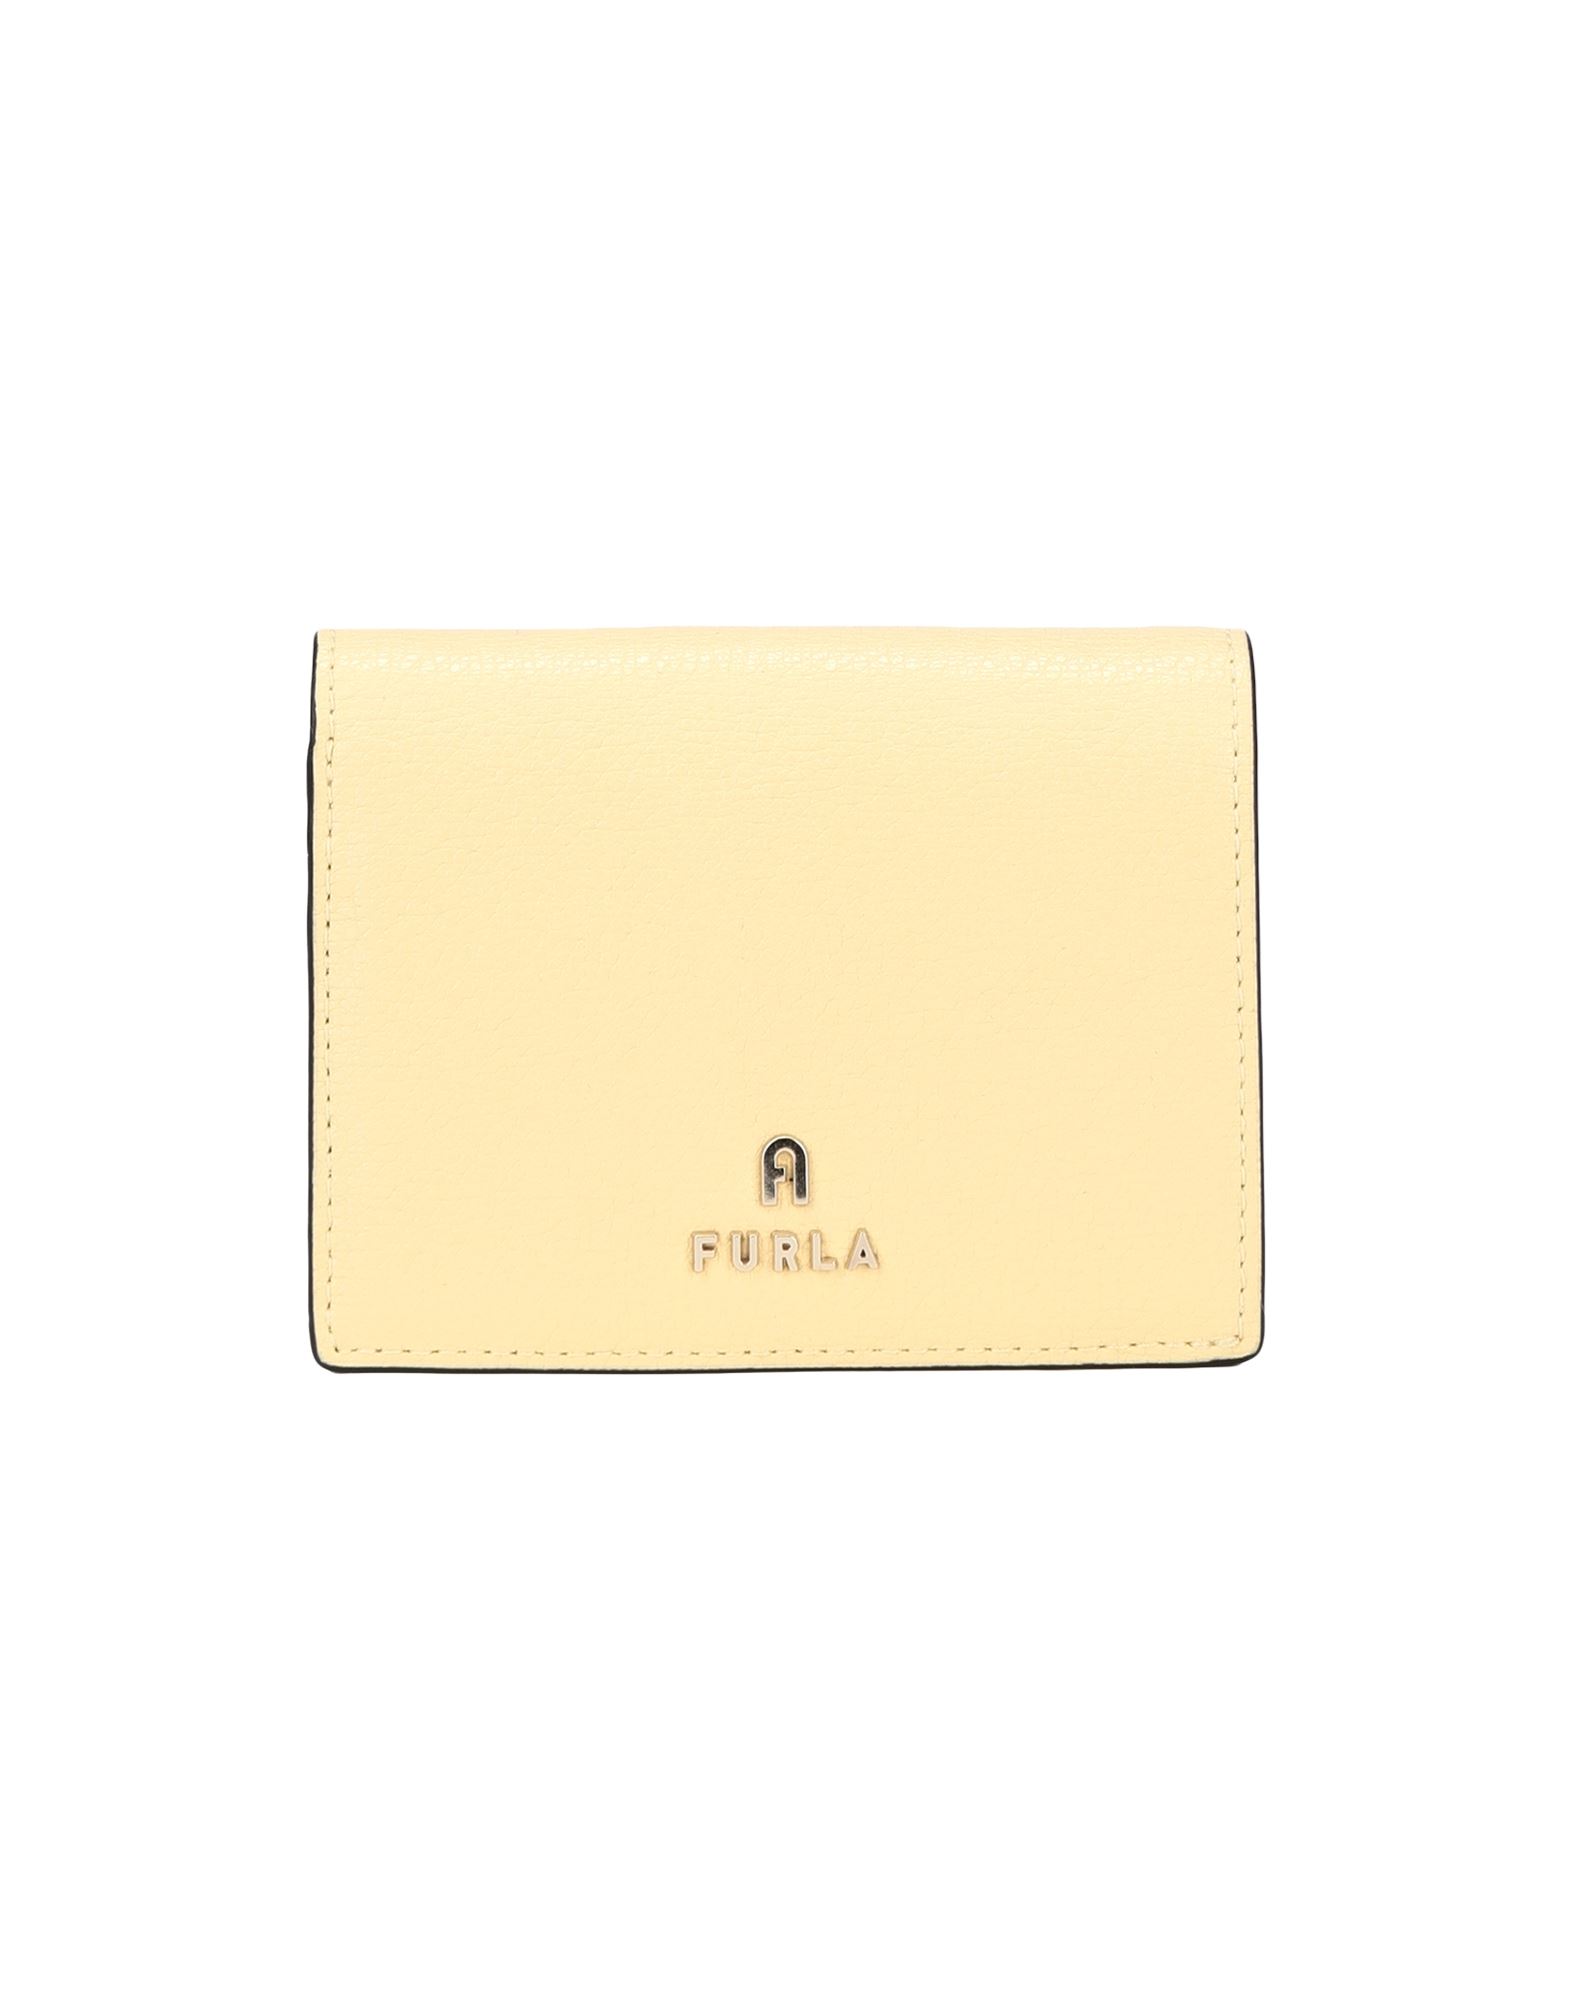 ԥ볫FURLA ǥ  饤ȥ סʥա 100% FURLA MAGNOLIA S COMPACT WALLET